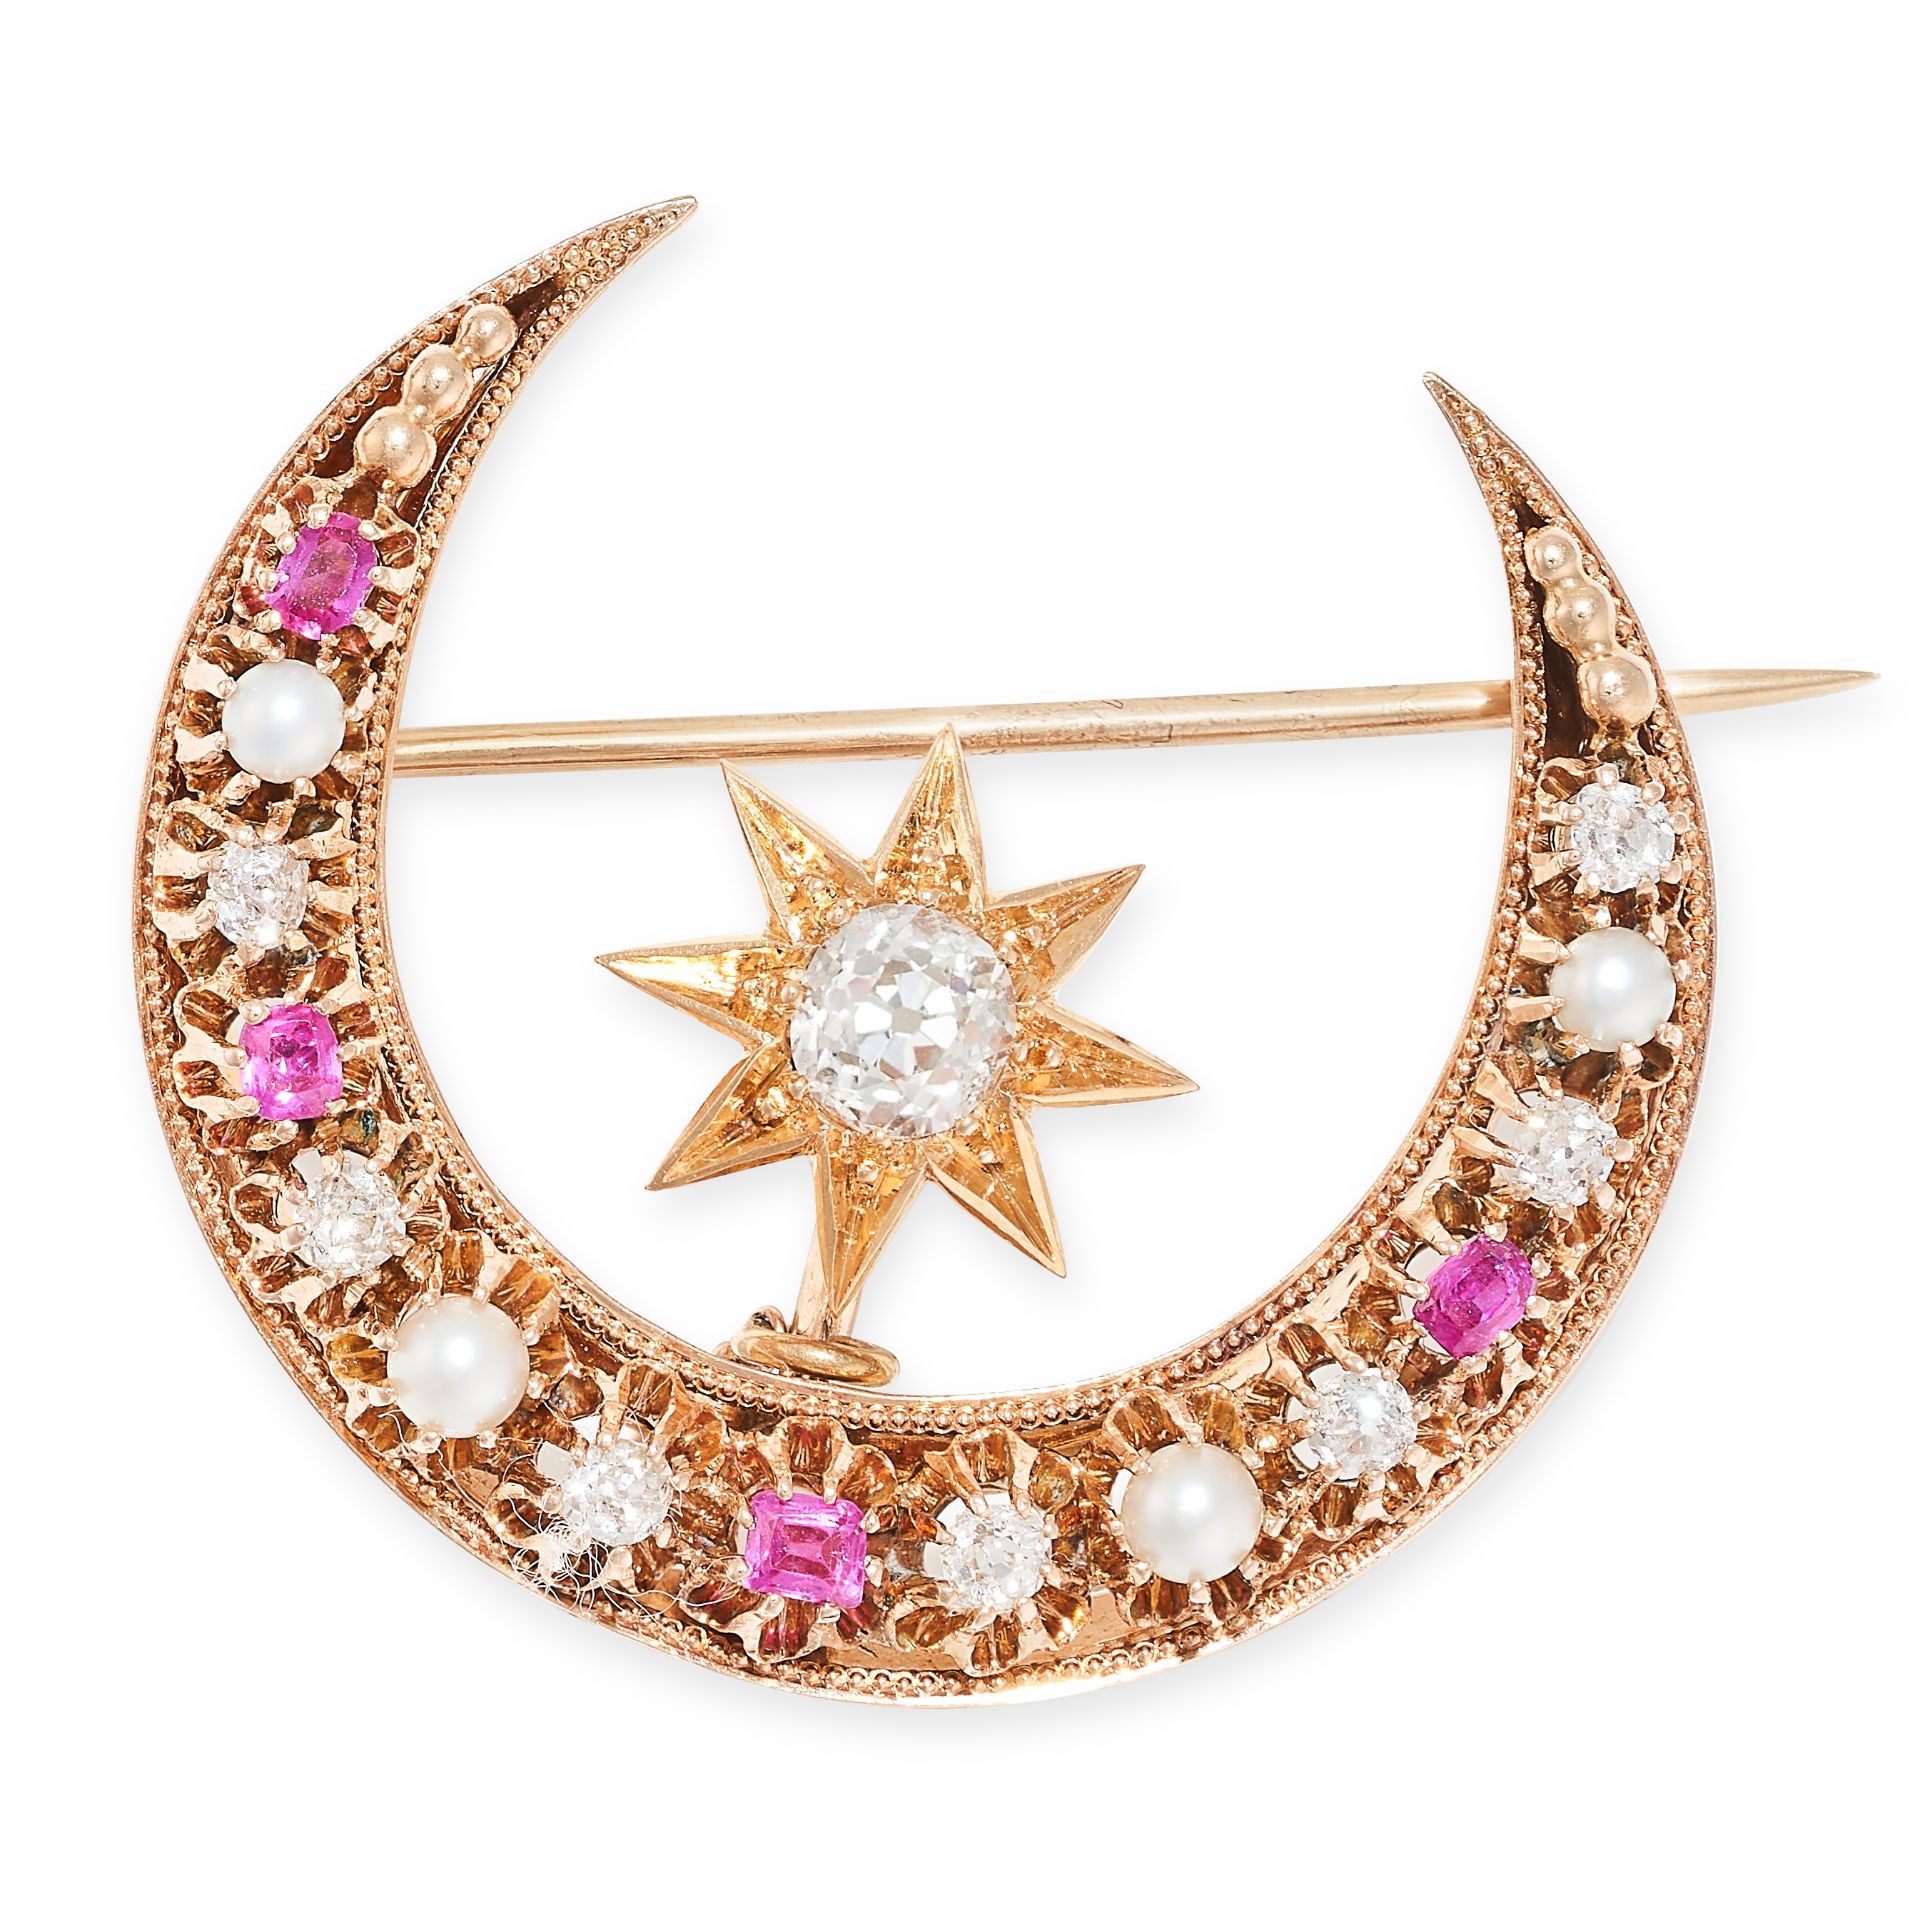 AN ANTIQUE DIAMOND, RUBY AND PEARL CRESCENT MOON BROOCH in 14ct rose gold, designed as a crescent... - Image 2 of 2